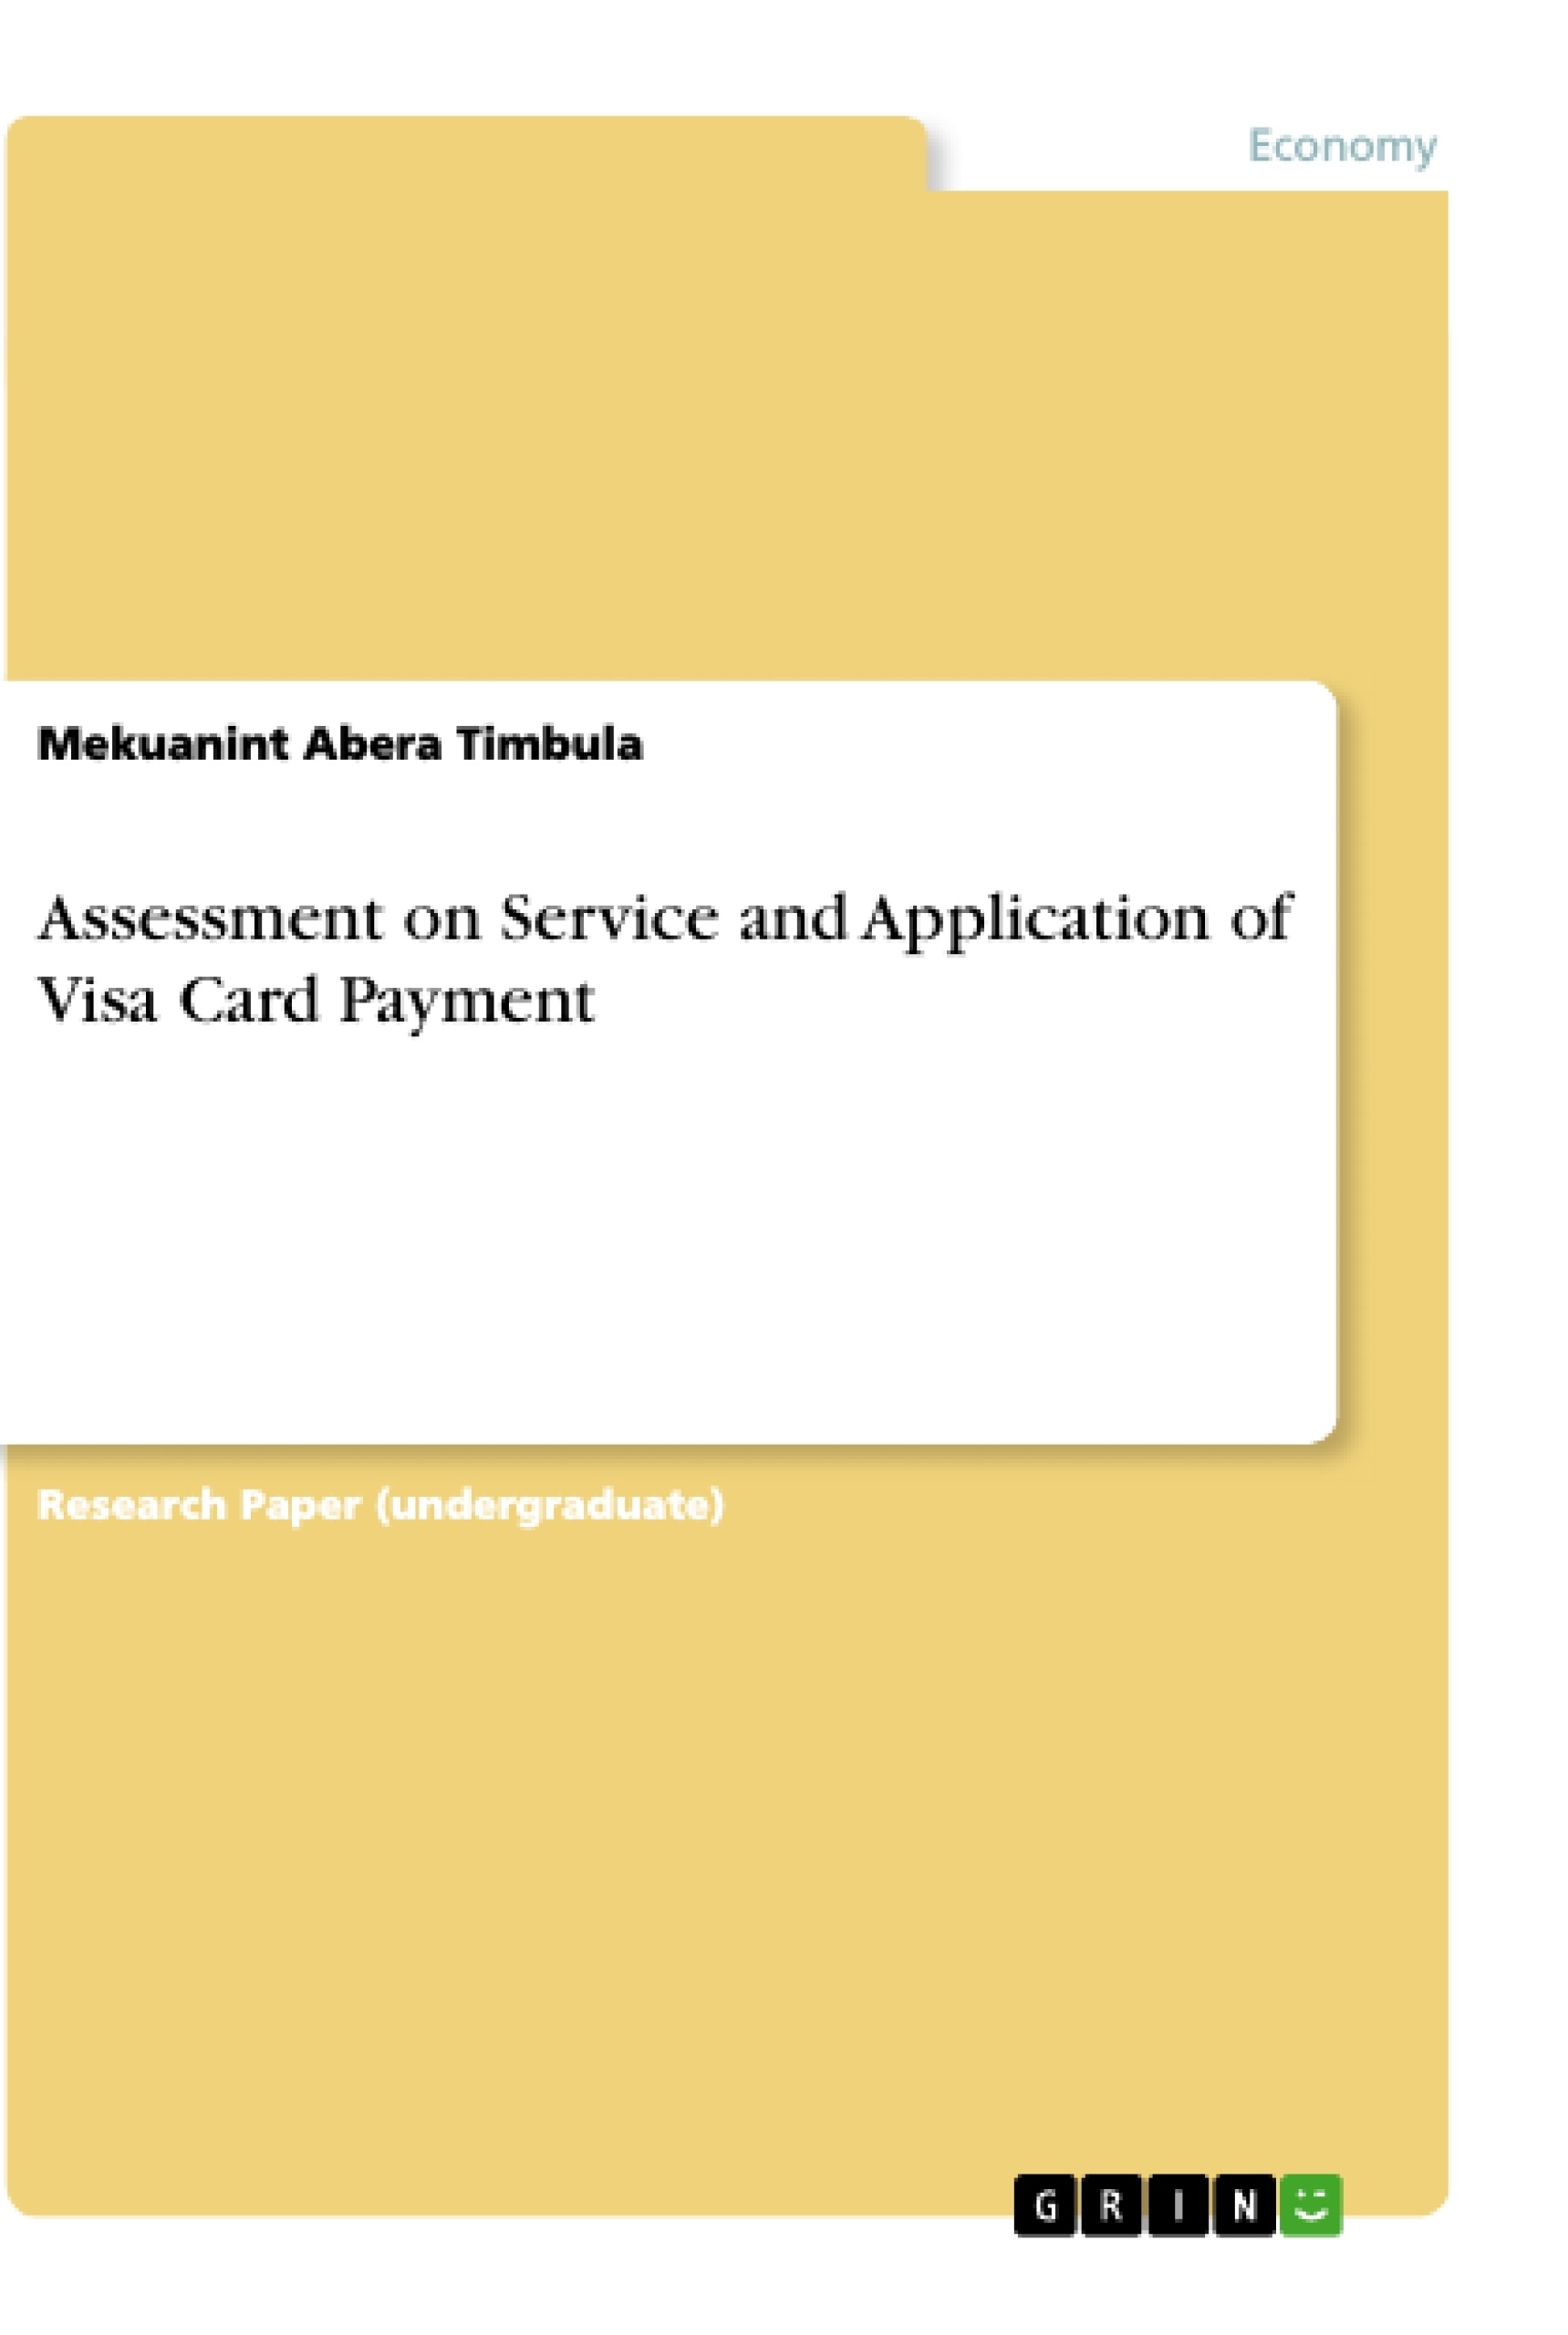 Title: Assessment on Service and Application of Visa Card Payment